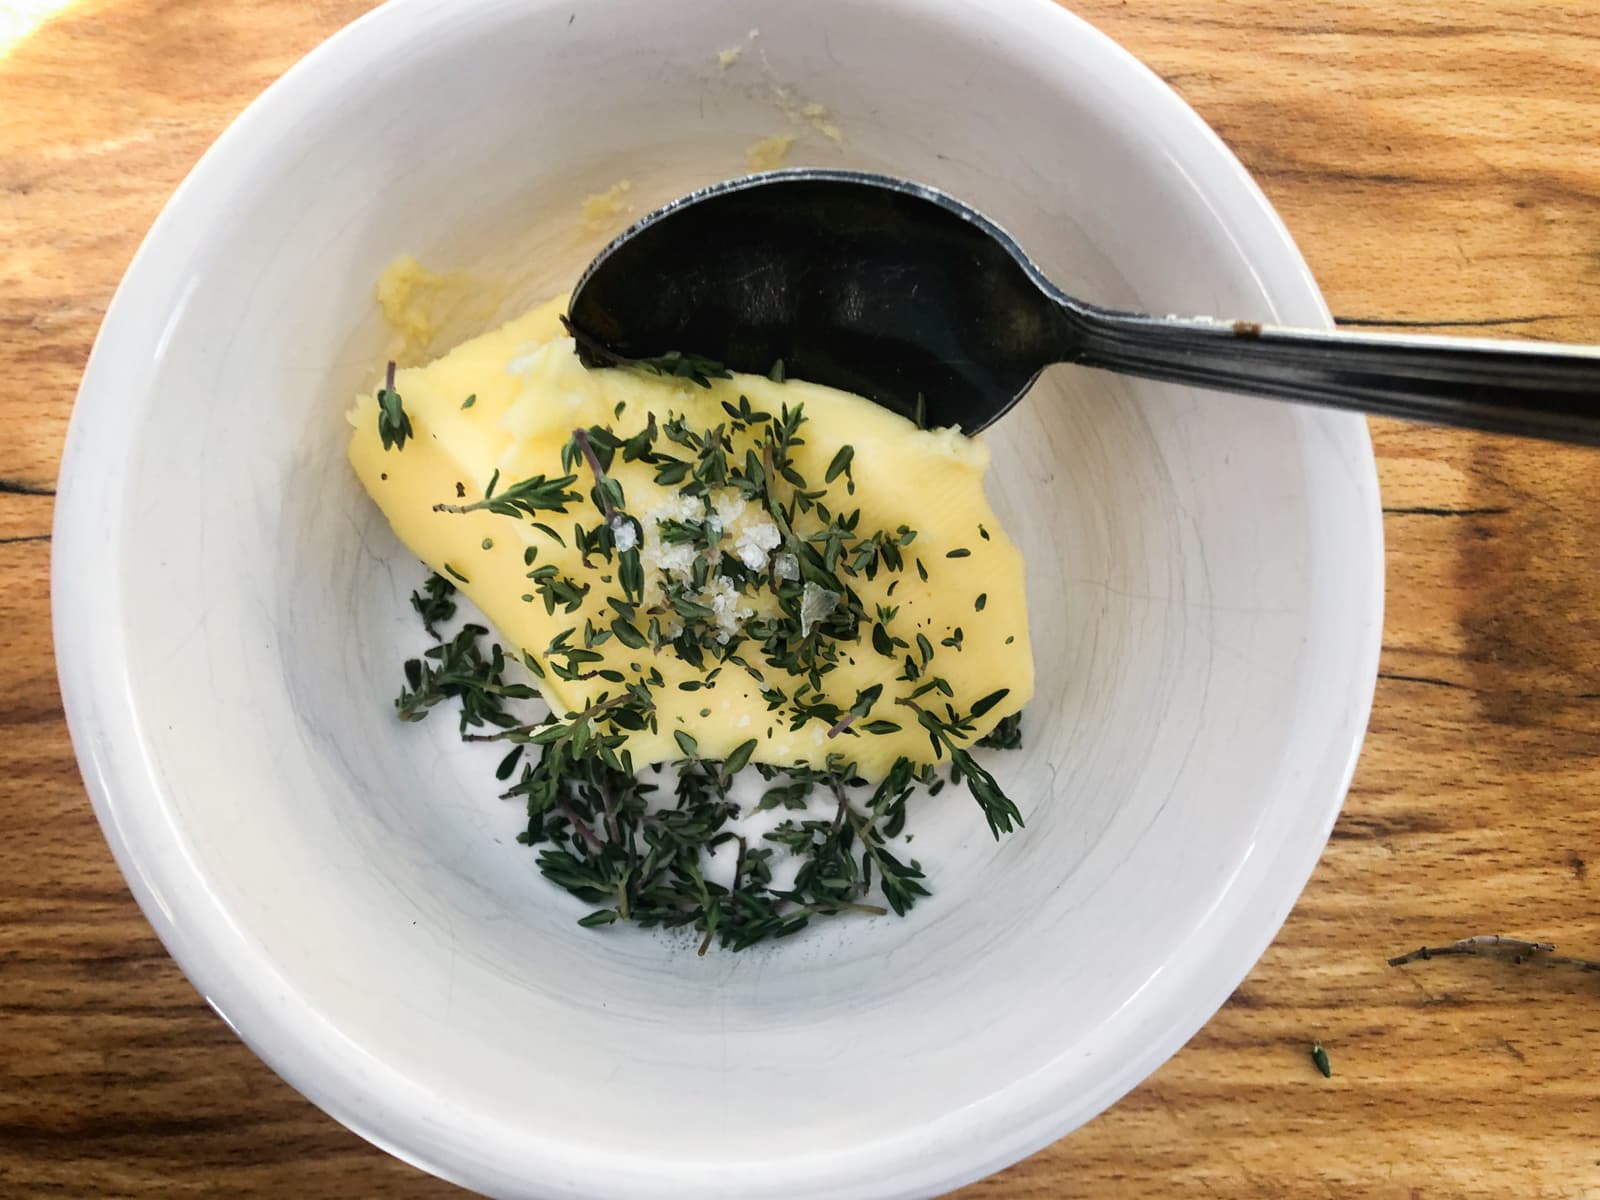 A dish of butter with added salt and fresh thyme